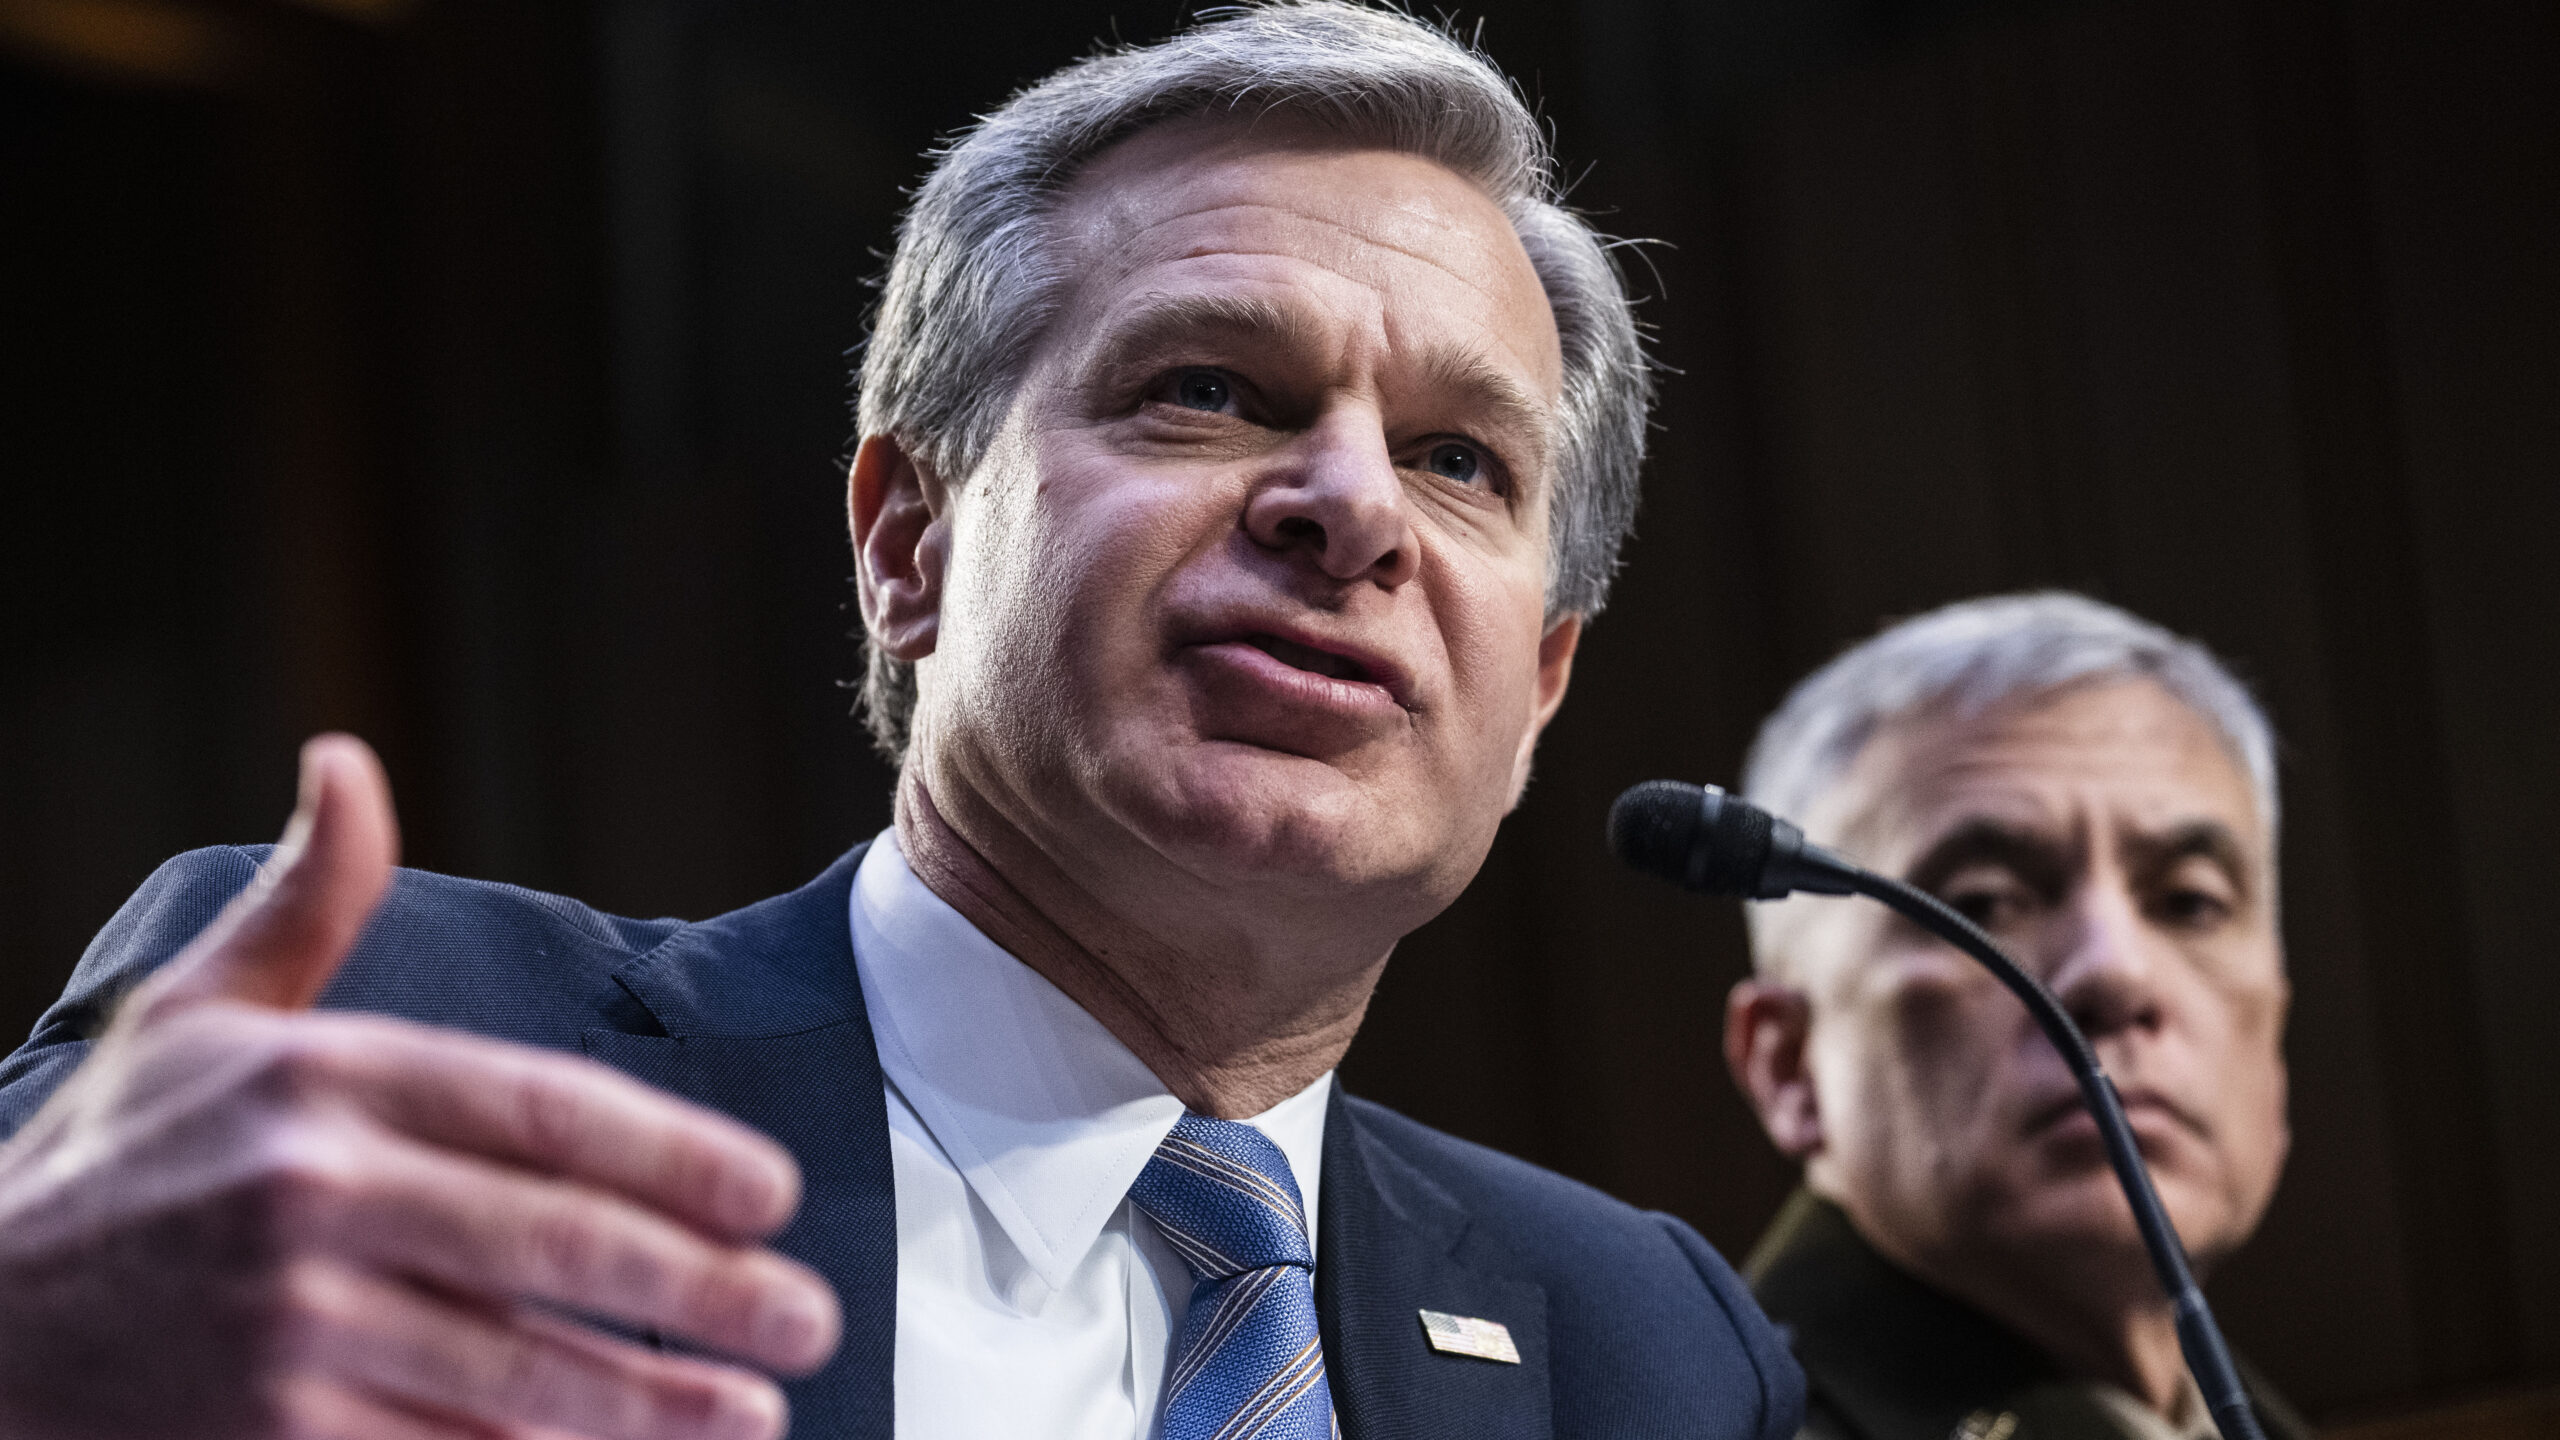 FBI Director Wray: Communist China Can Take Control Of ‘Millions’ Of Americans’ Phones With TikTok